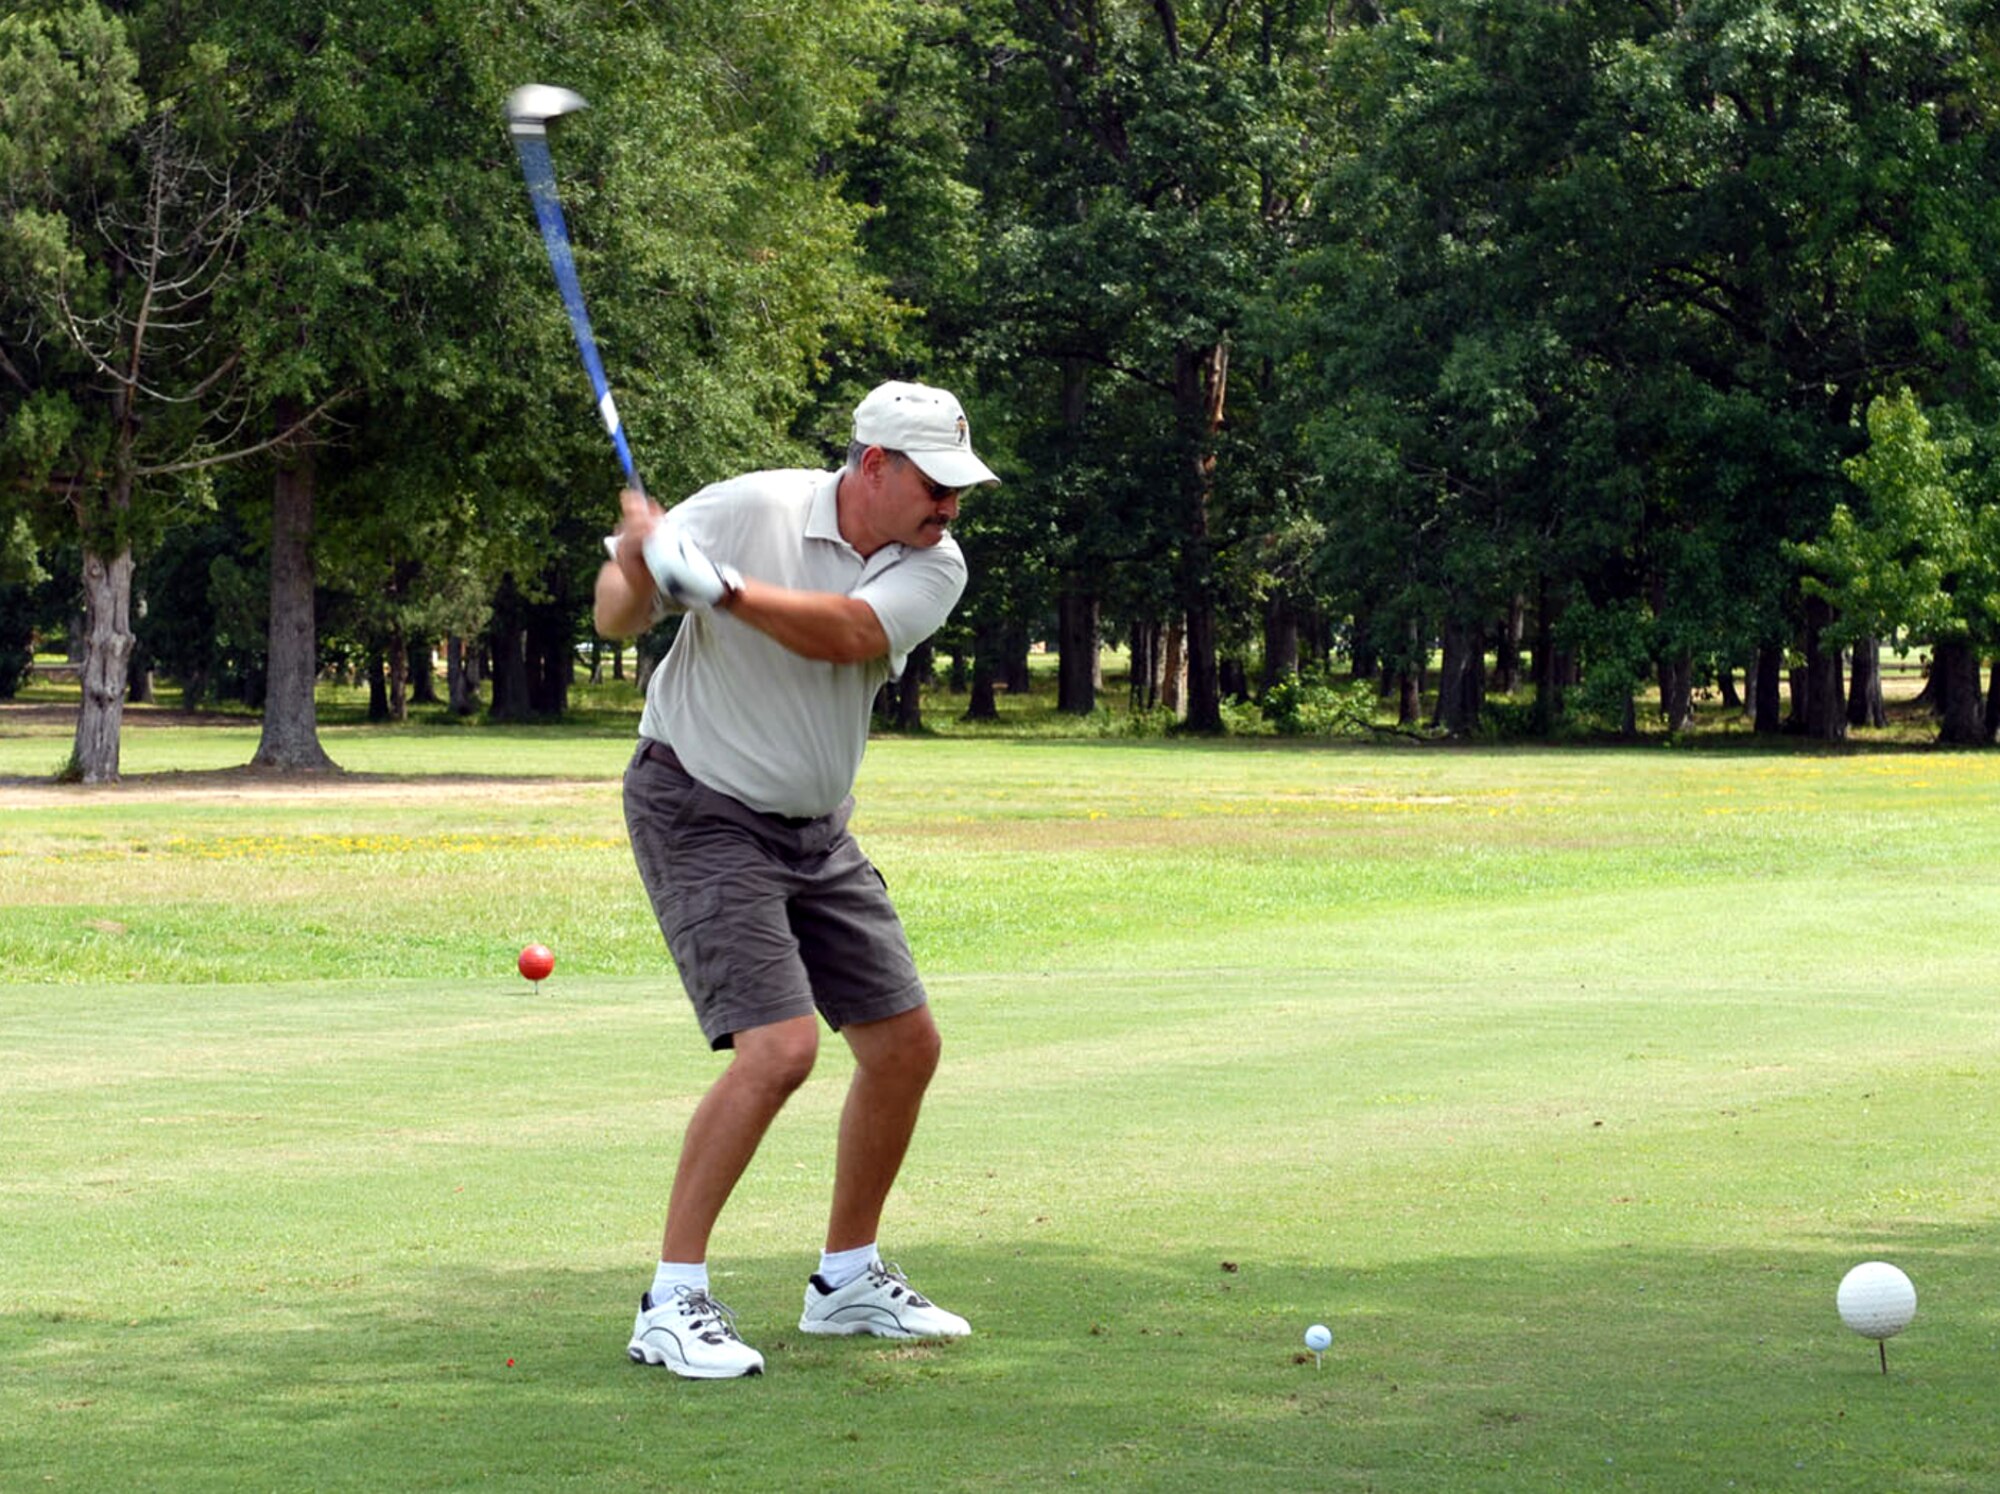 Randy Bailey, 14th Logistics Readiness Division, tees off at the Air Force Ball Fundraiser Golf Tournament held at Whispering Pines Friday. Bailey and teammates Roger Hinshaw, Julian McCrary and Mary Ann Shows won first place honors in the tournament. (U.S. Air Force photo by Elizabeth Owens)